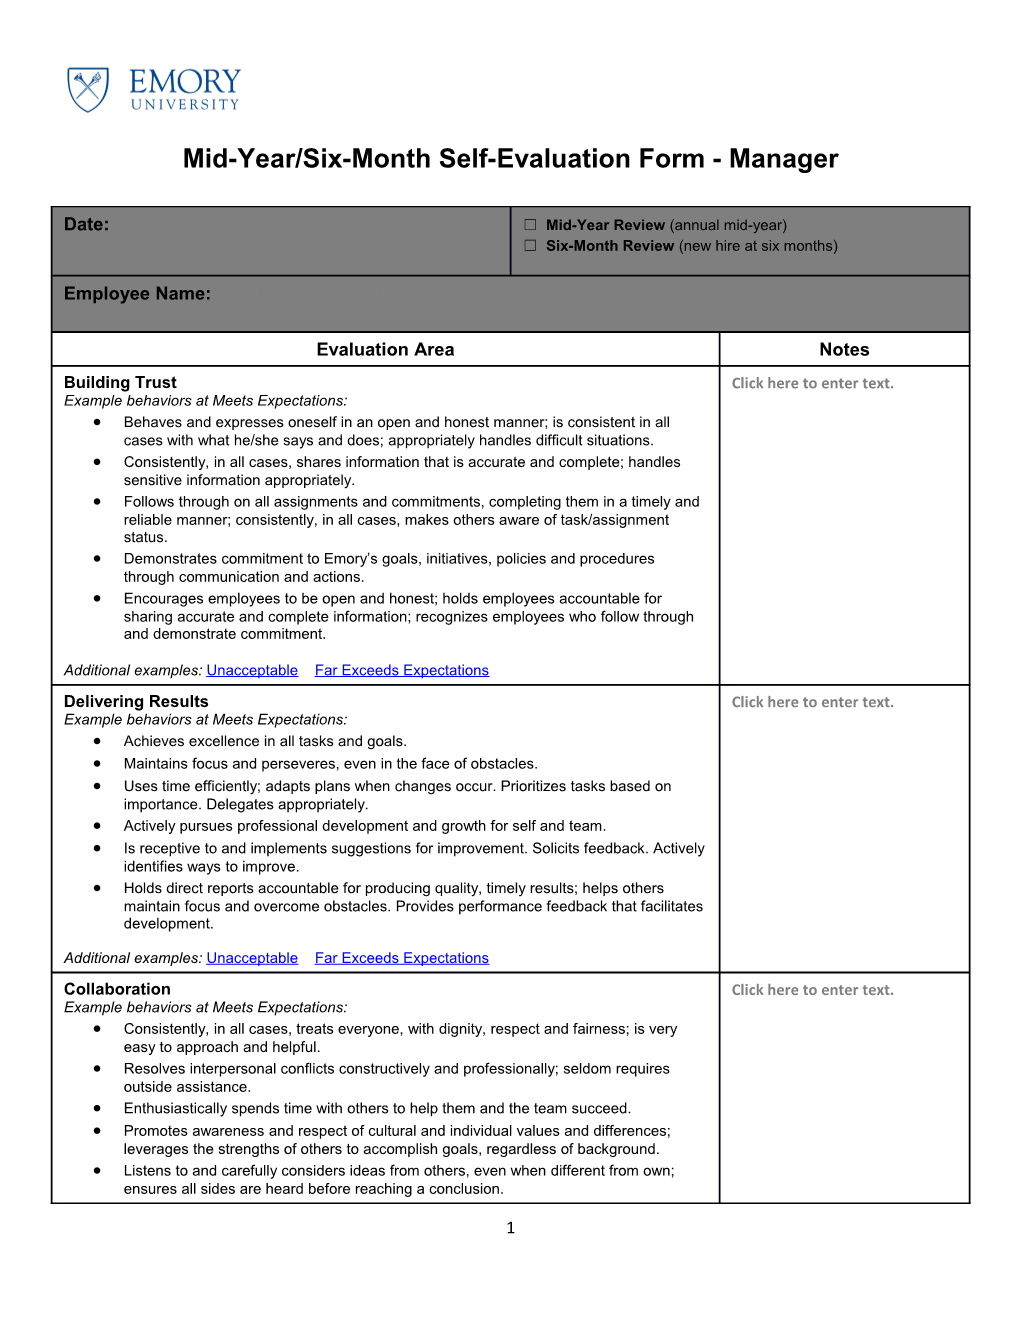 Mid-Year/Six-Month Self-Evaluation Form - Manager